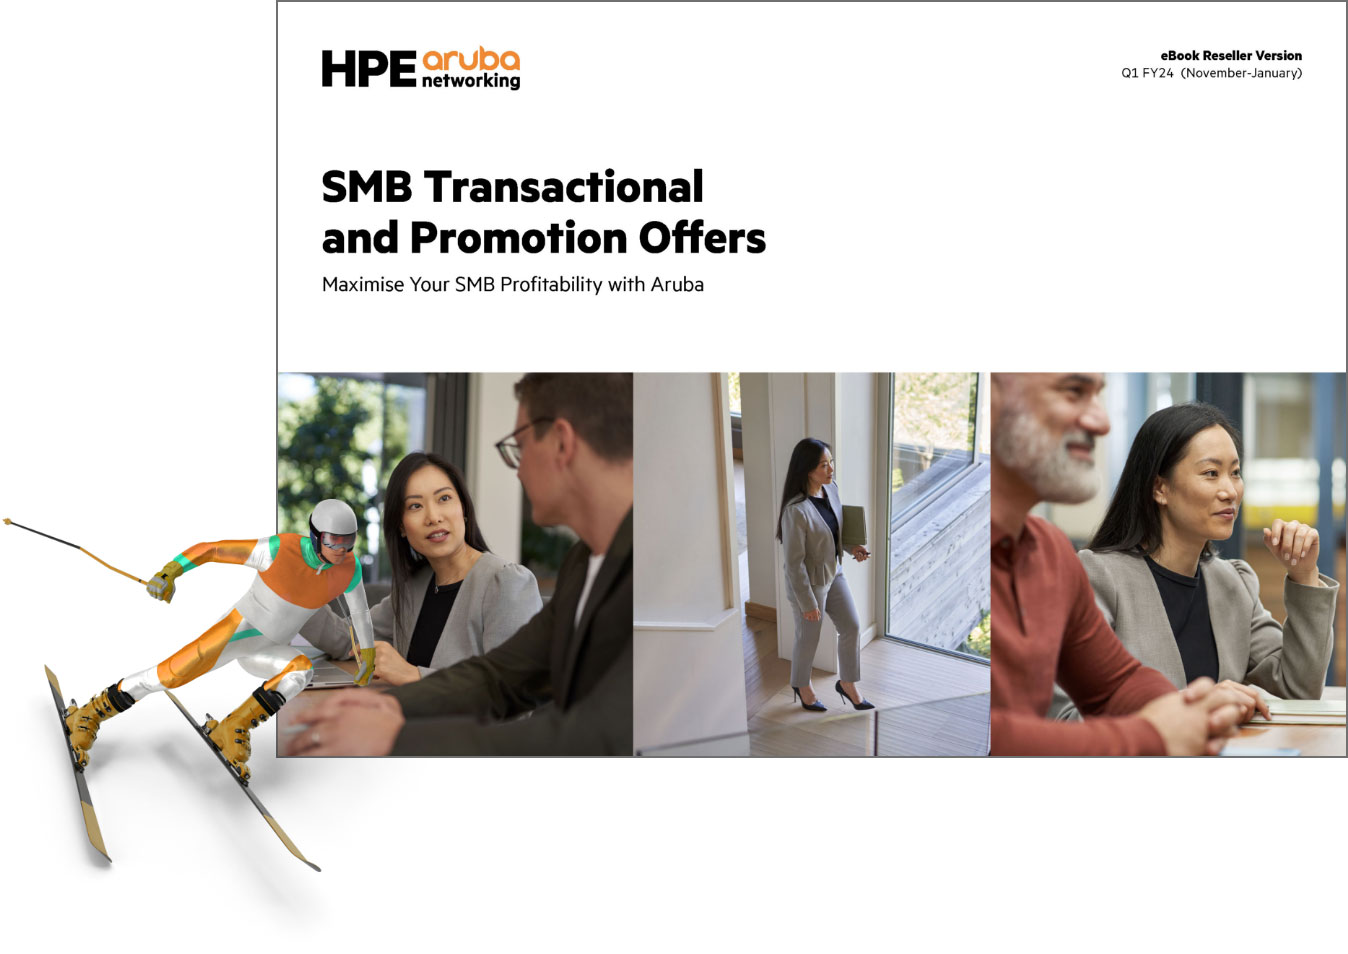 SMB Transactional and Promotion Offers